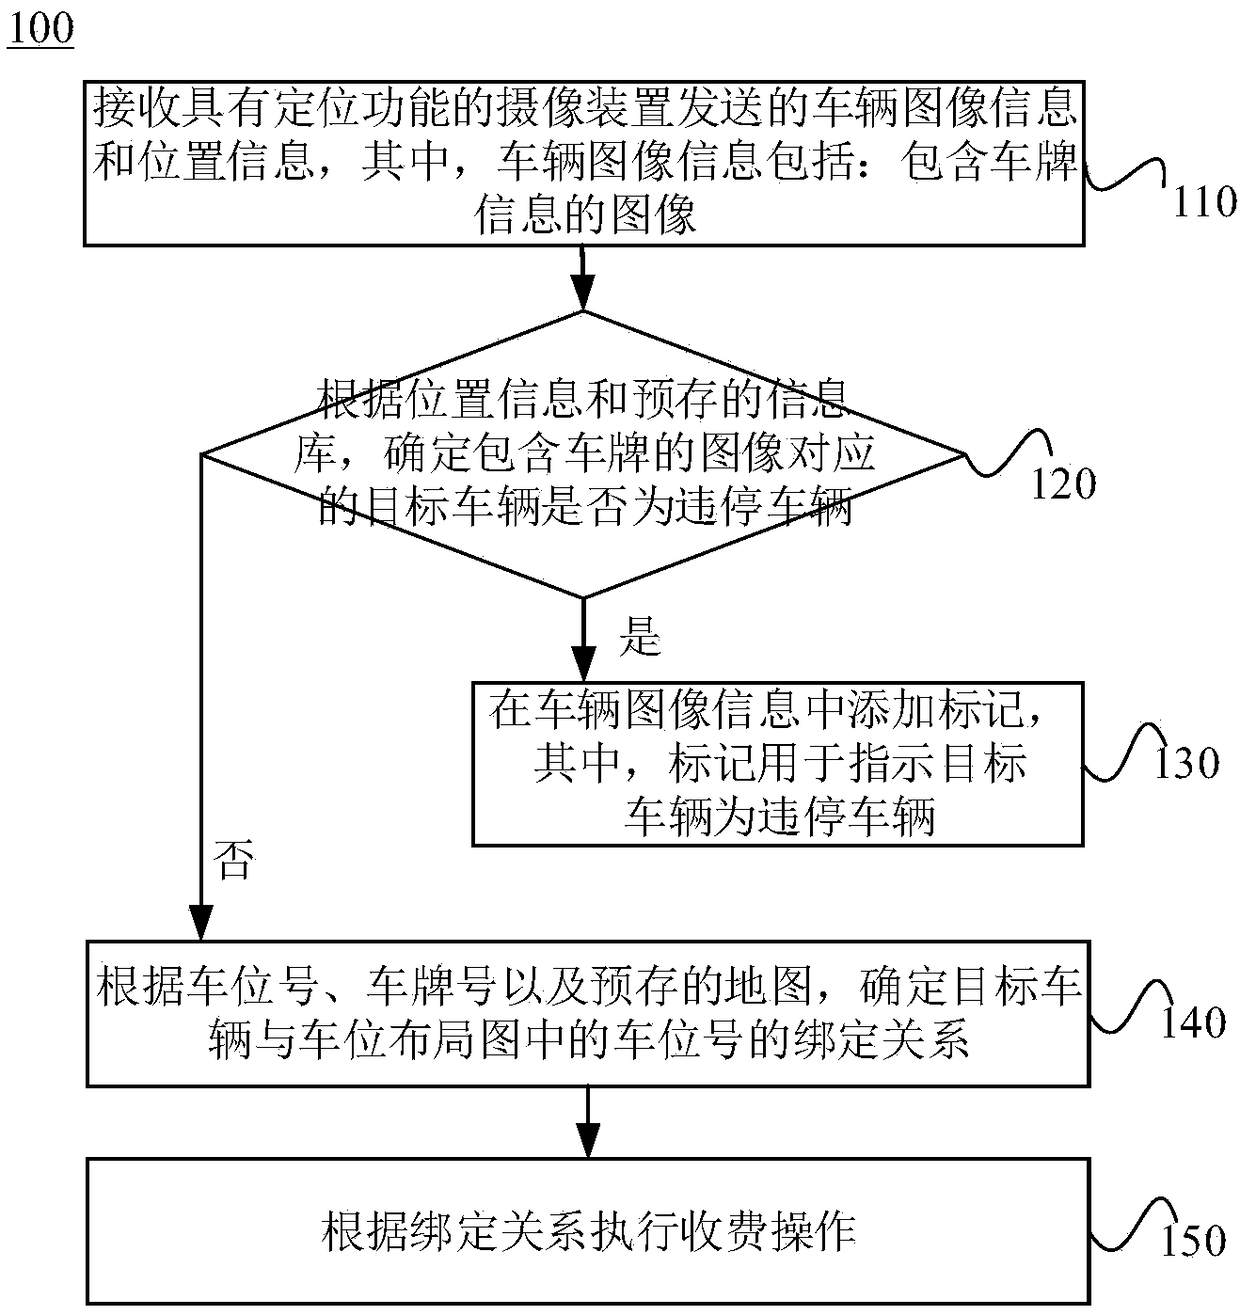 Vehicle supervision method and system